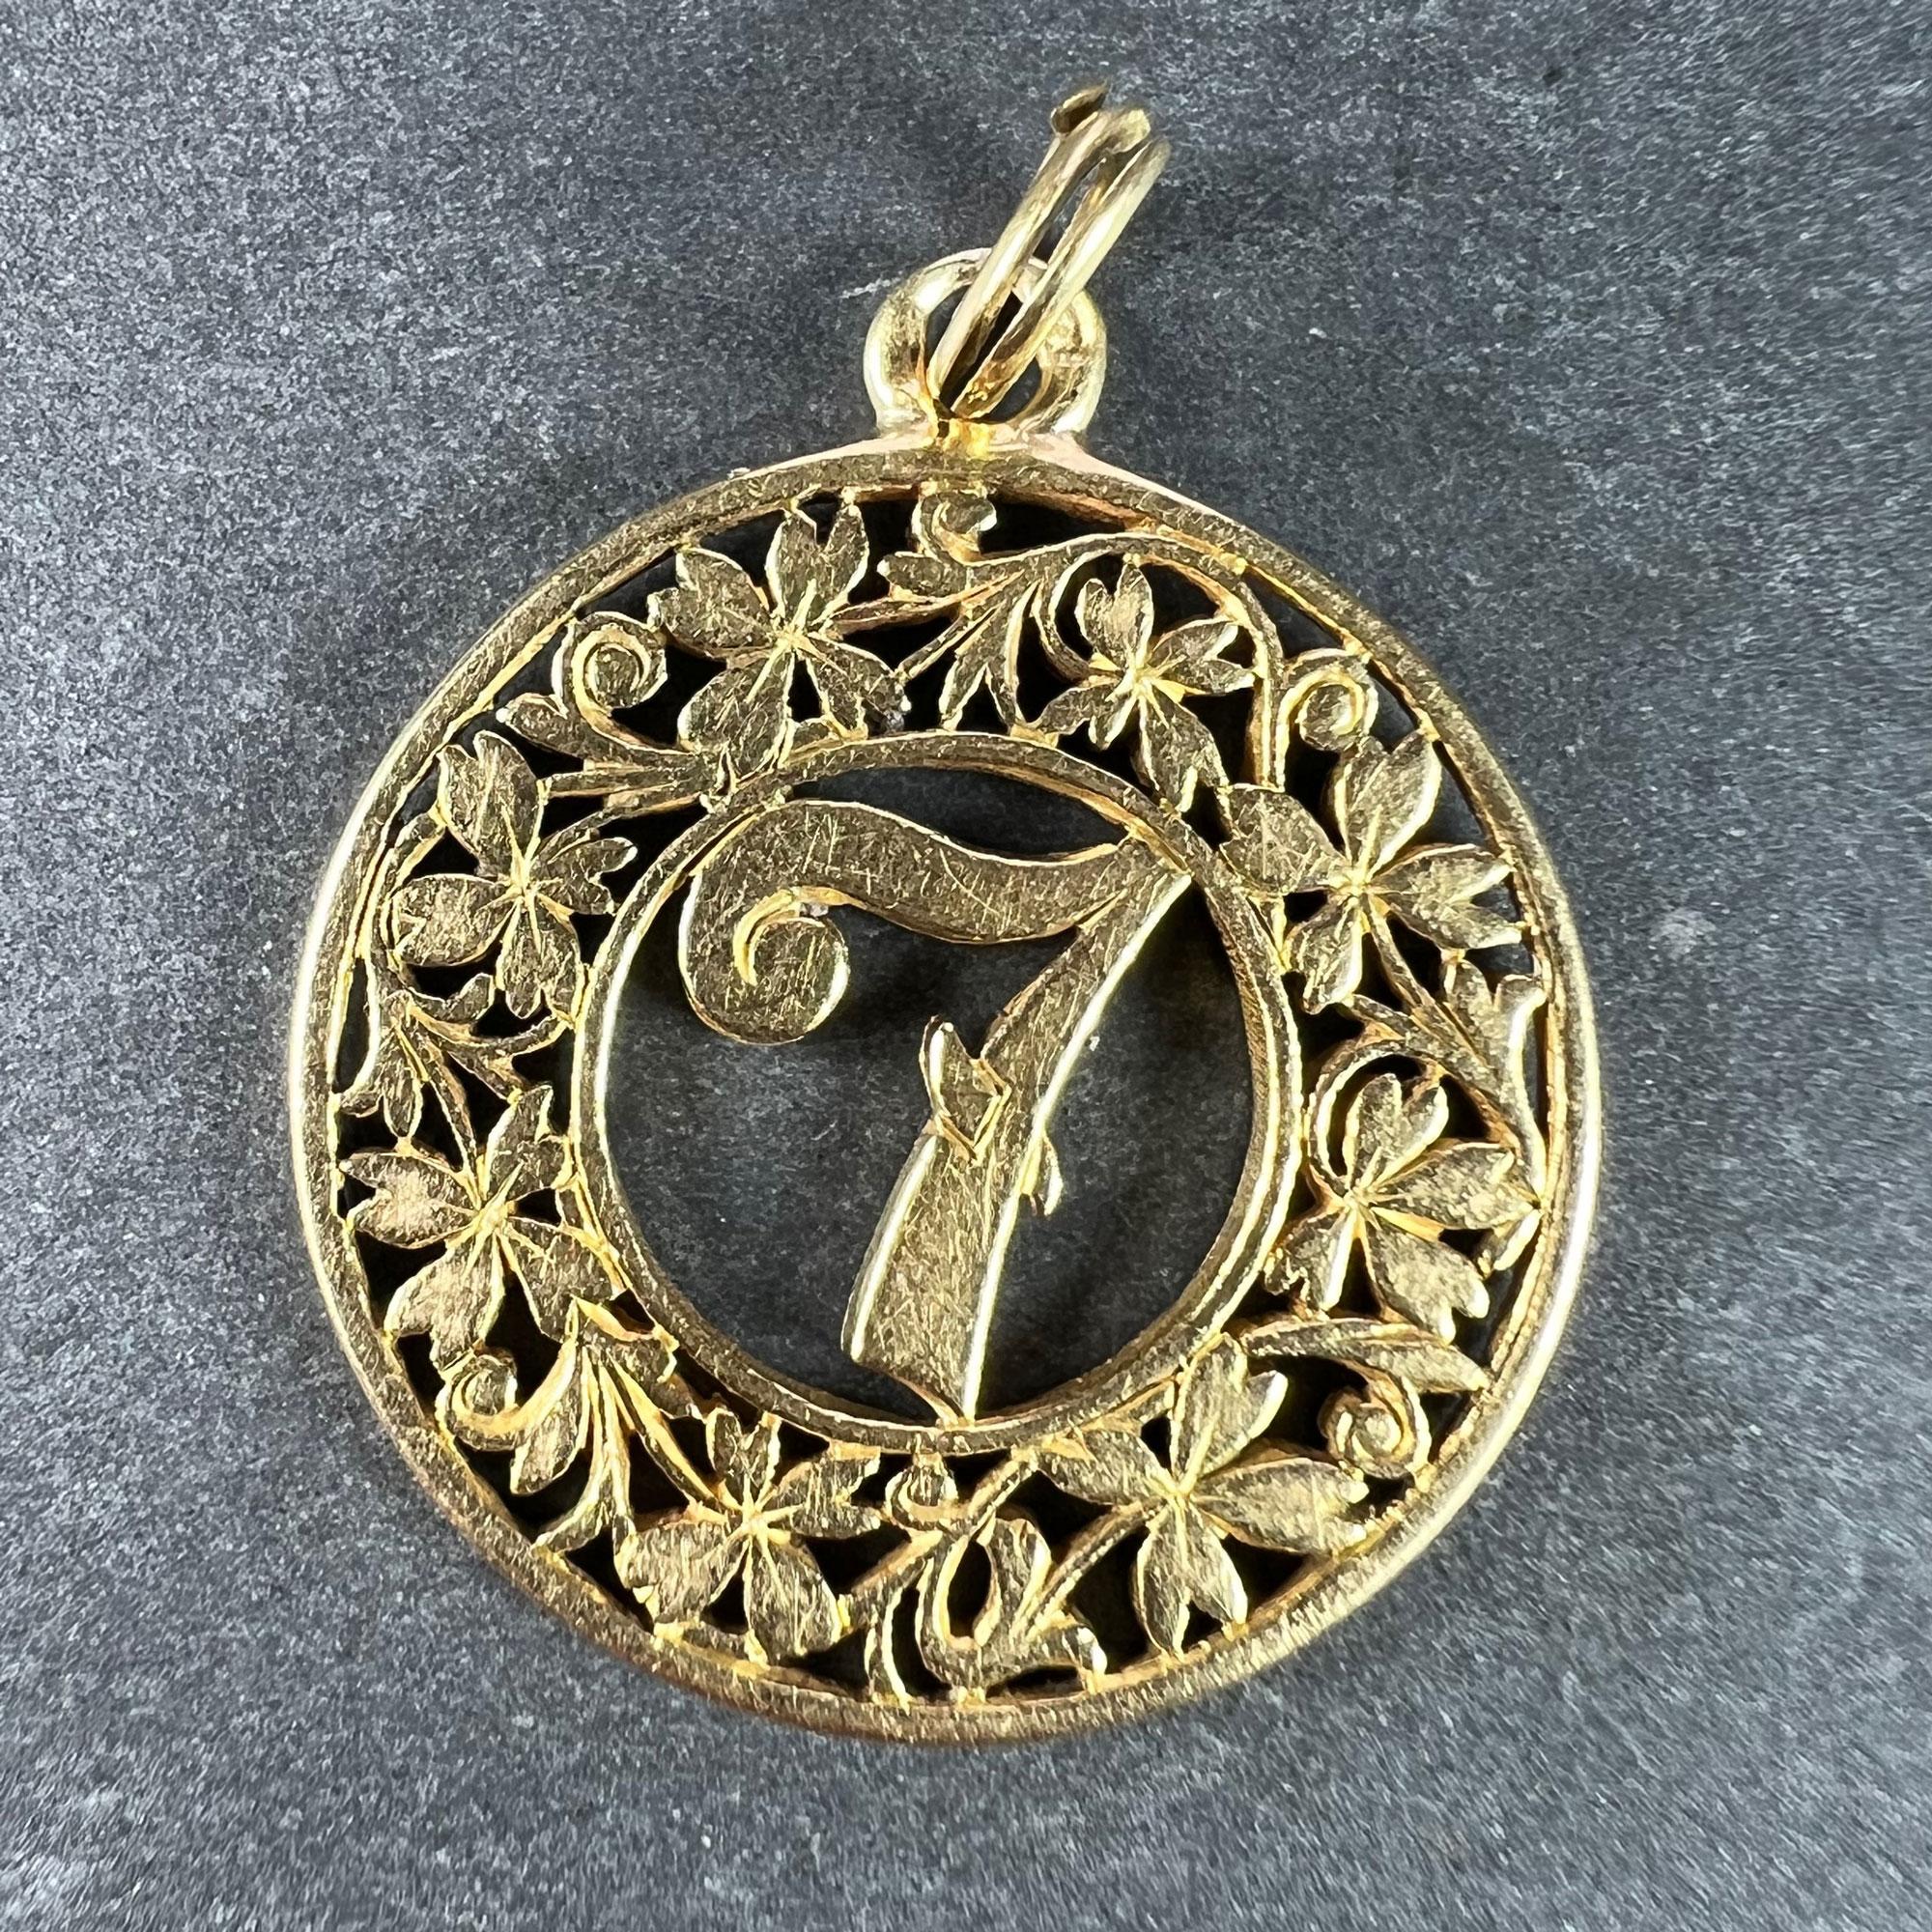 An 18 karat (18K) yellow gold good luck charm pendant designed as the lucky 'Number 7' in the centre of a pierced wreath of four leaf clovers or shamrocks. Stamped with the owl mark for French import and 18 karat gold. The spring ring stamped with